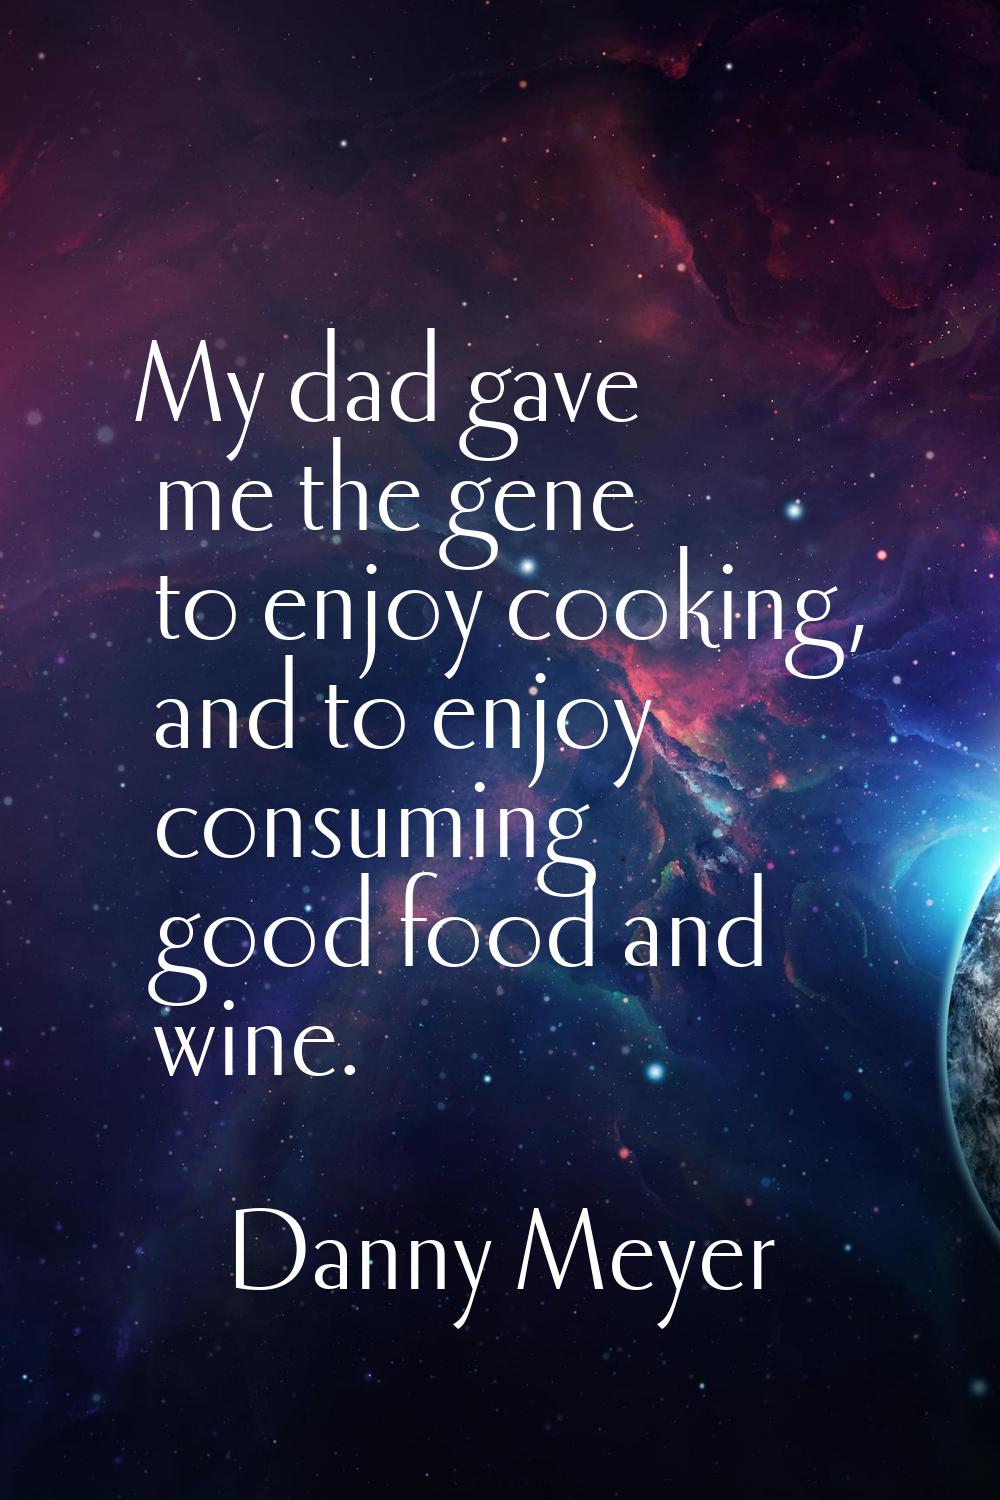 My dad gave me the gene to enjoy cooking, and to enjoy consuming good food and wine.